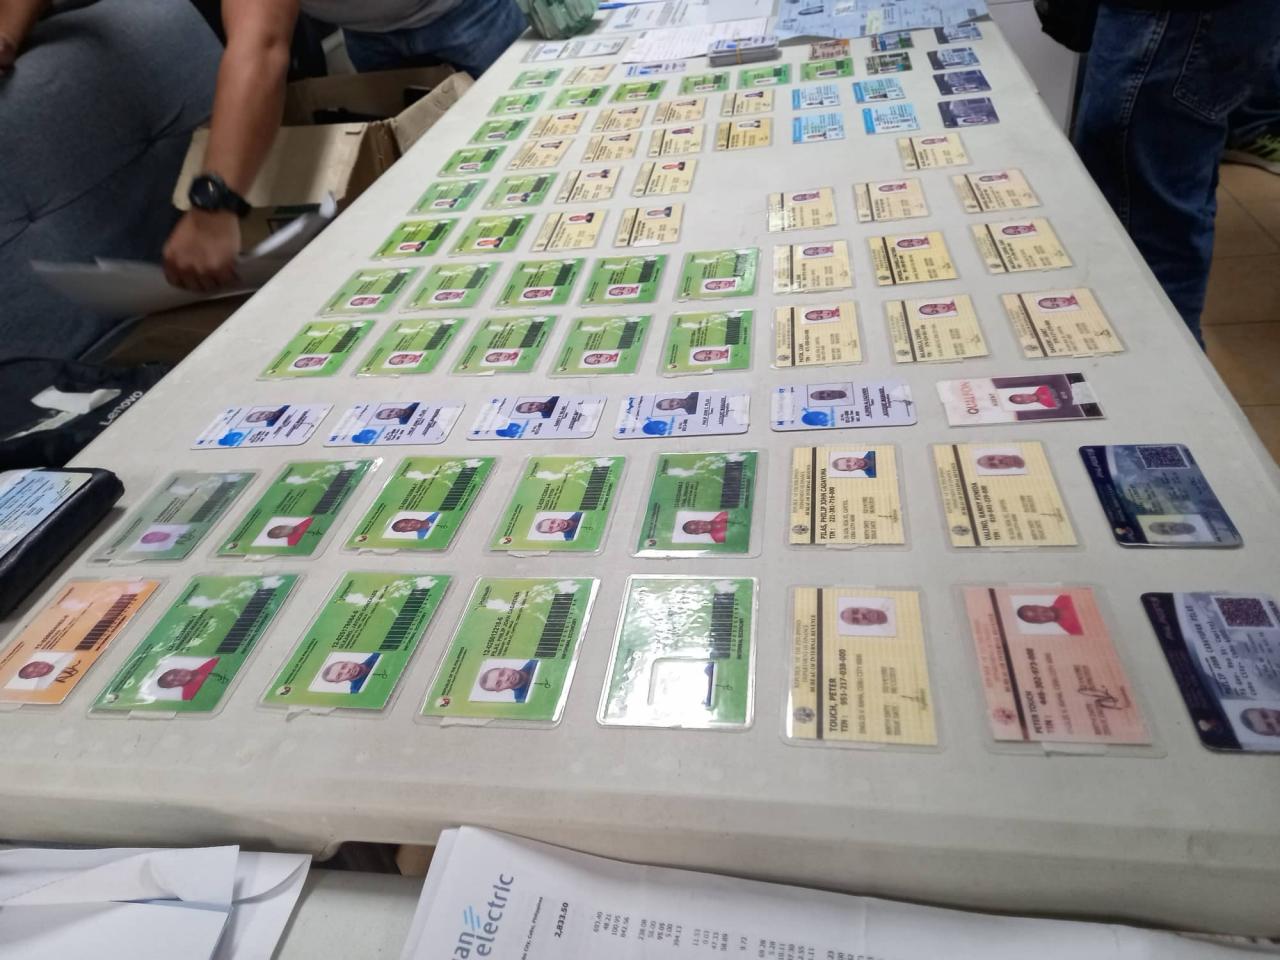 Four Nigerians arrested in Philippines for allegedly forging govt IDs, other documents after being exposed by a lady 